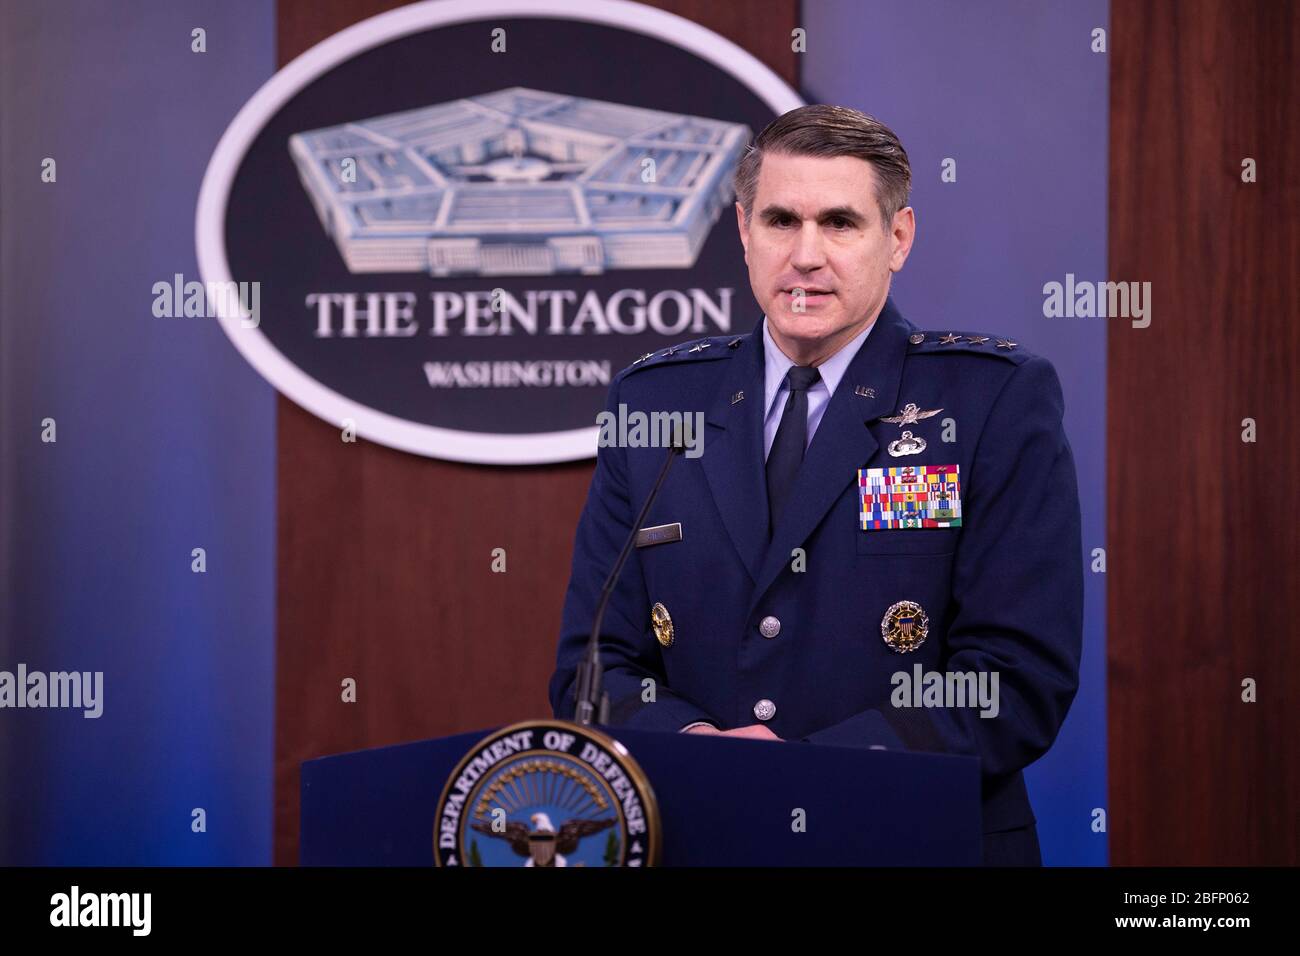 U.S. Air Force Lt. Gen. B.J. Shwedo, Director for Command, Control, Communications, and Computers, Cyber, and Chief Information Officer, Joint Staff, briefs reporters on the COVID-19 pandemic at the Pentagon April 13, 2020 in Arlington, Virginia. Stock Photo